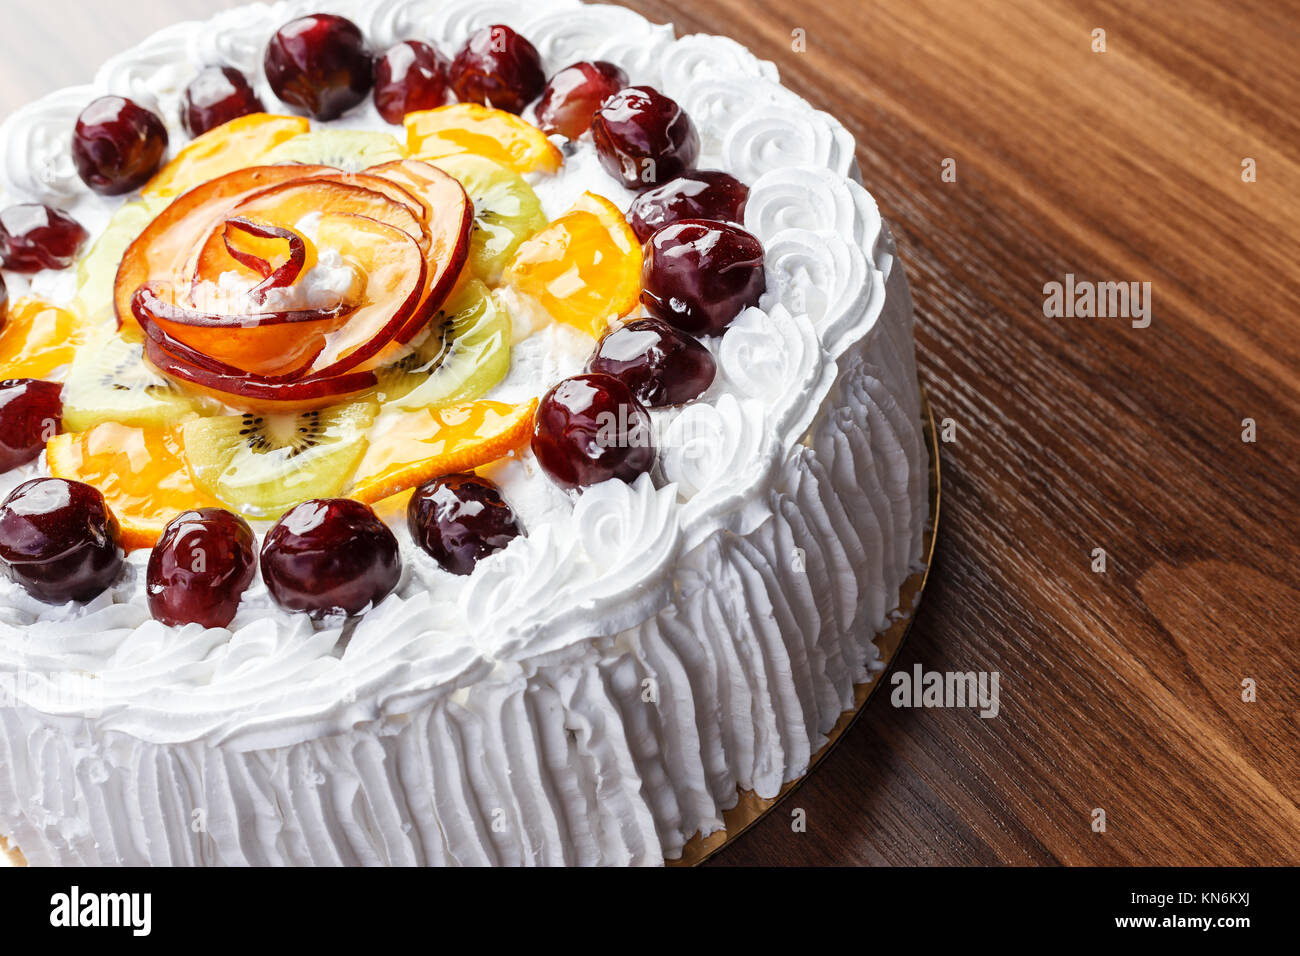 Orange And White Wedding Cake Hi Res Stock Photography And Images Page 7 Alamy